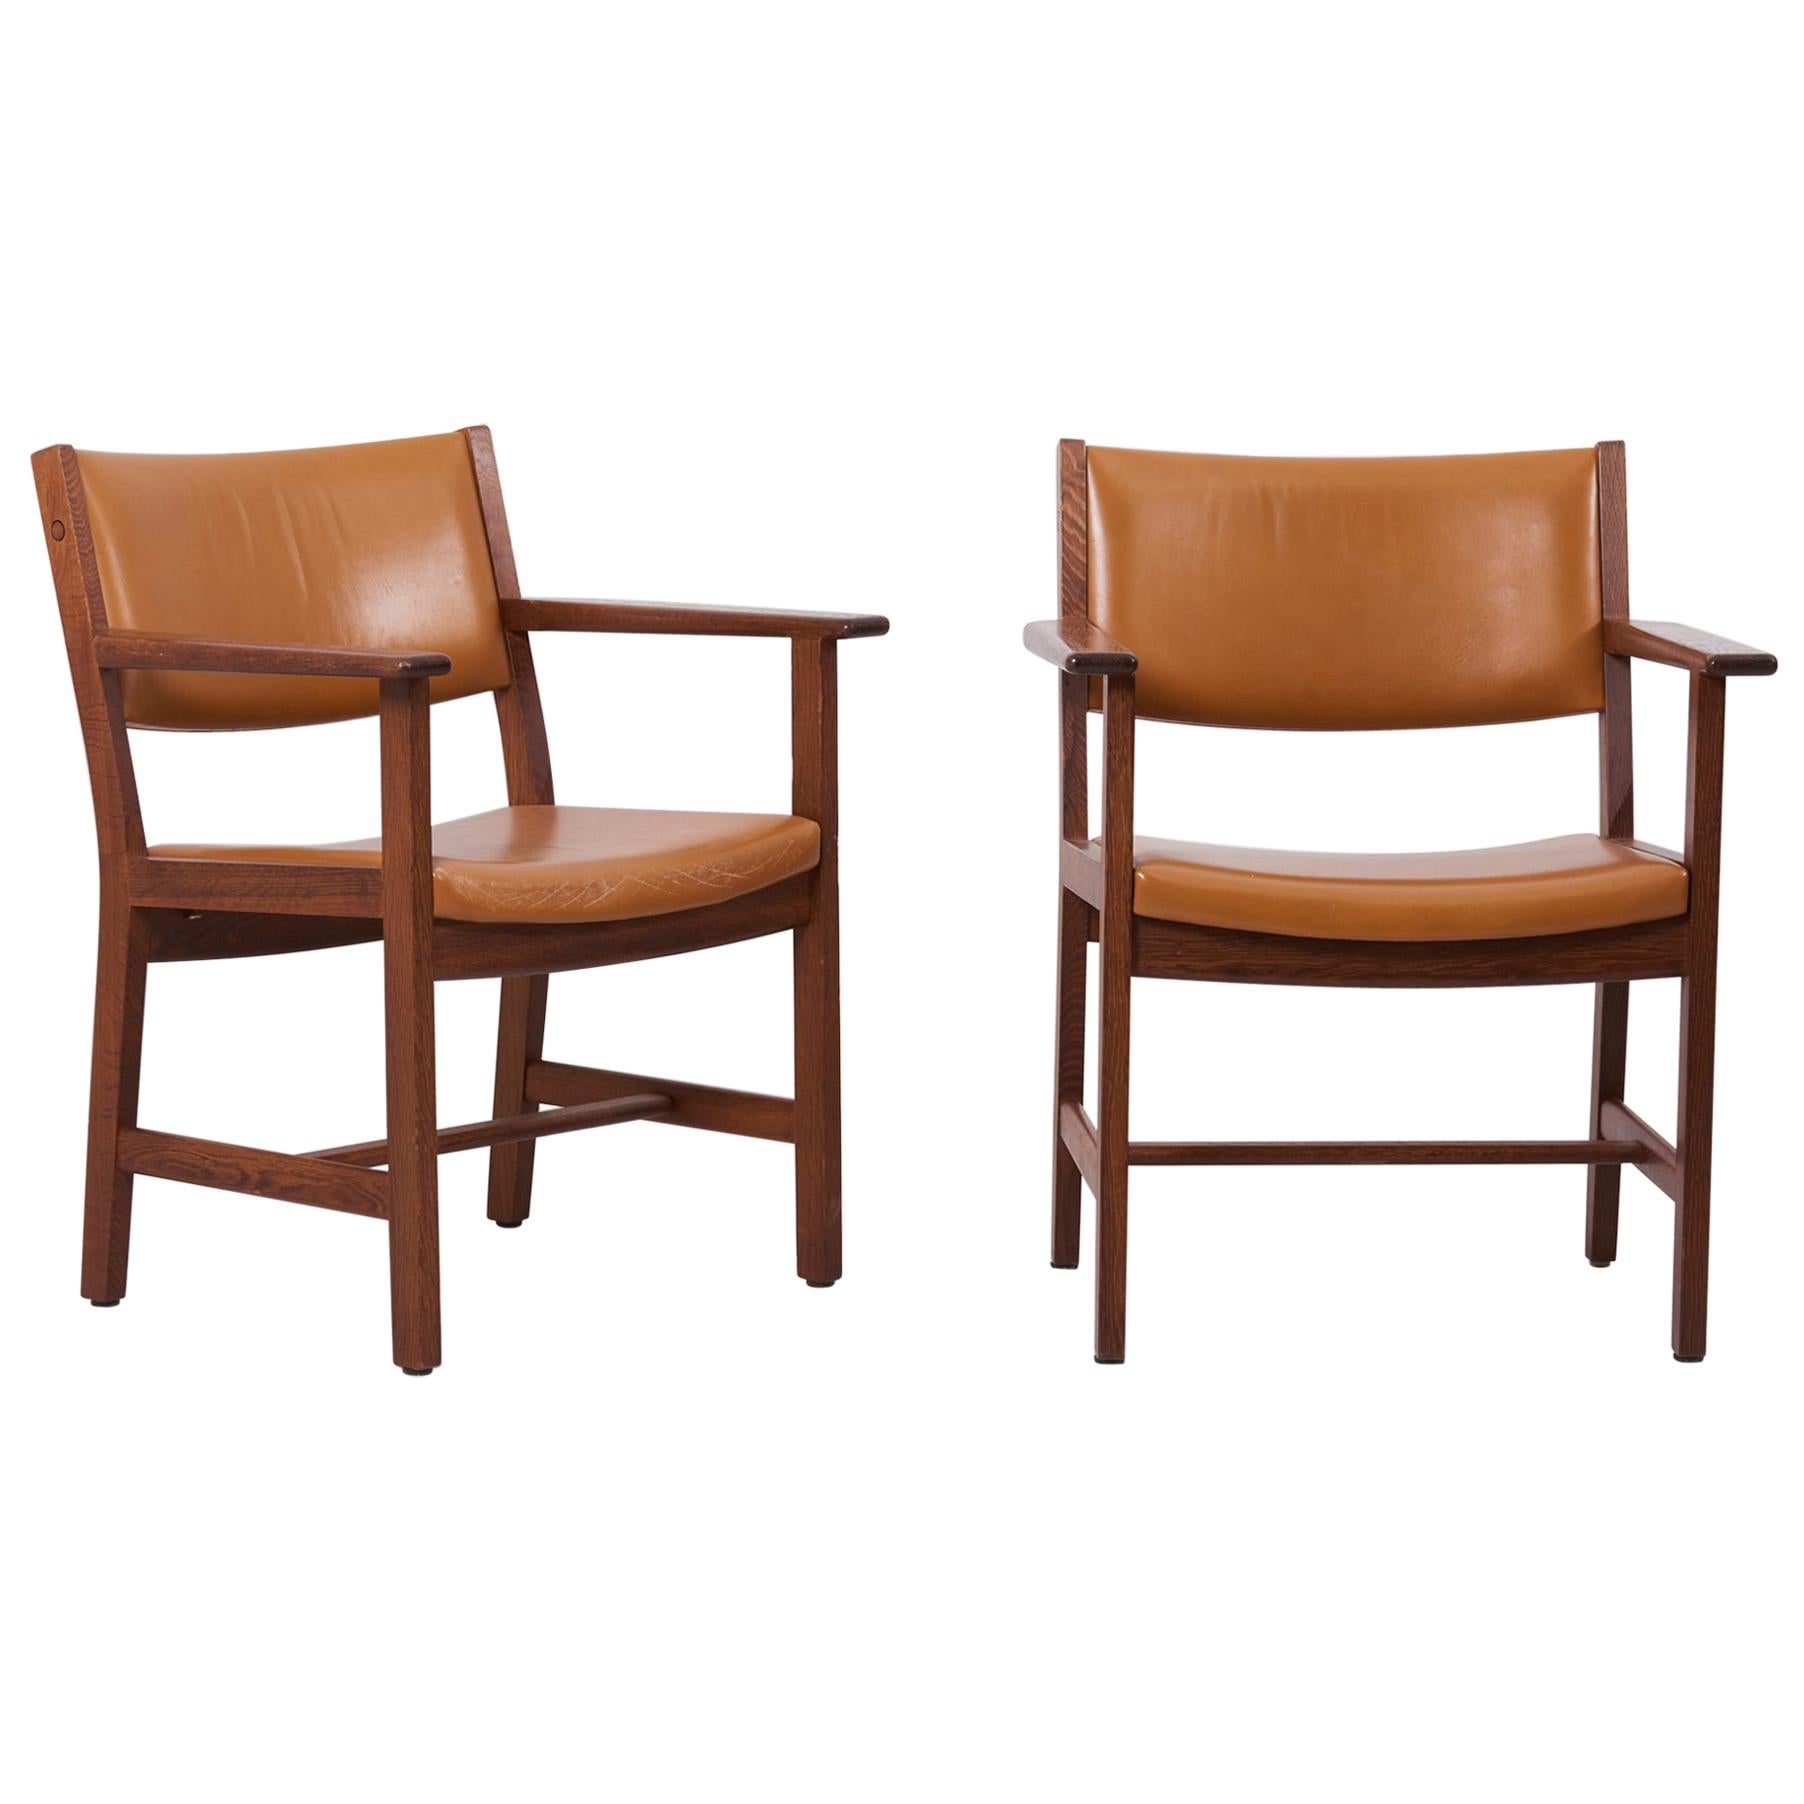 Pair of GE Armchairs in Leather by Hans Wegner for by GETAMA, Denmark, 1960s